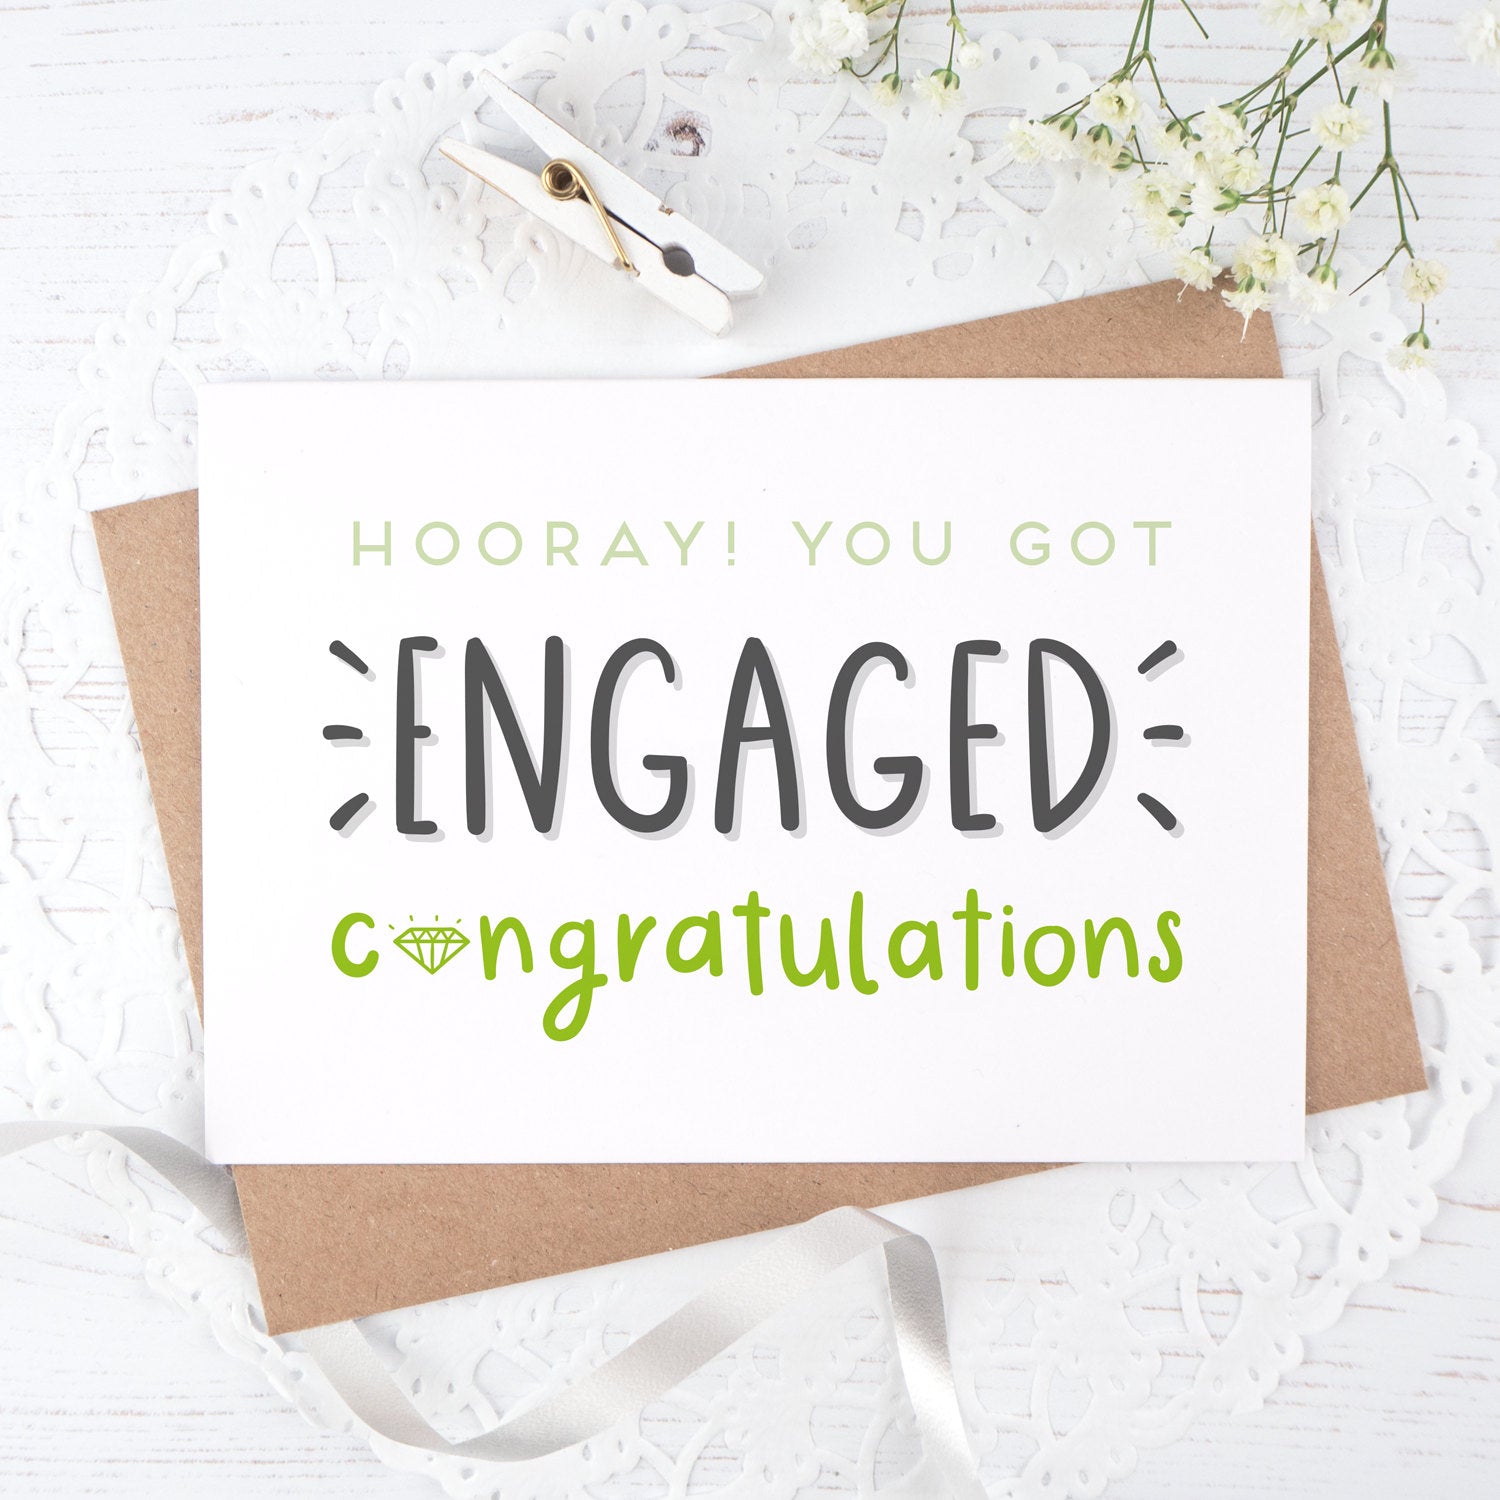 Engagement congratulations card in green